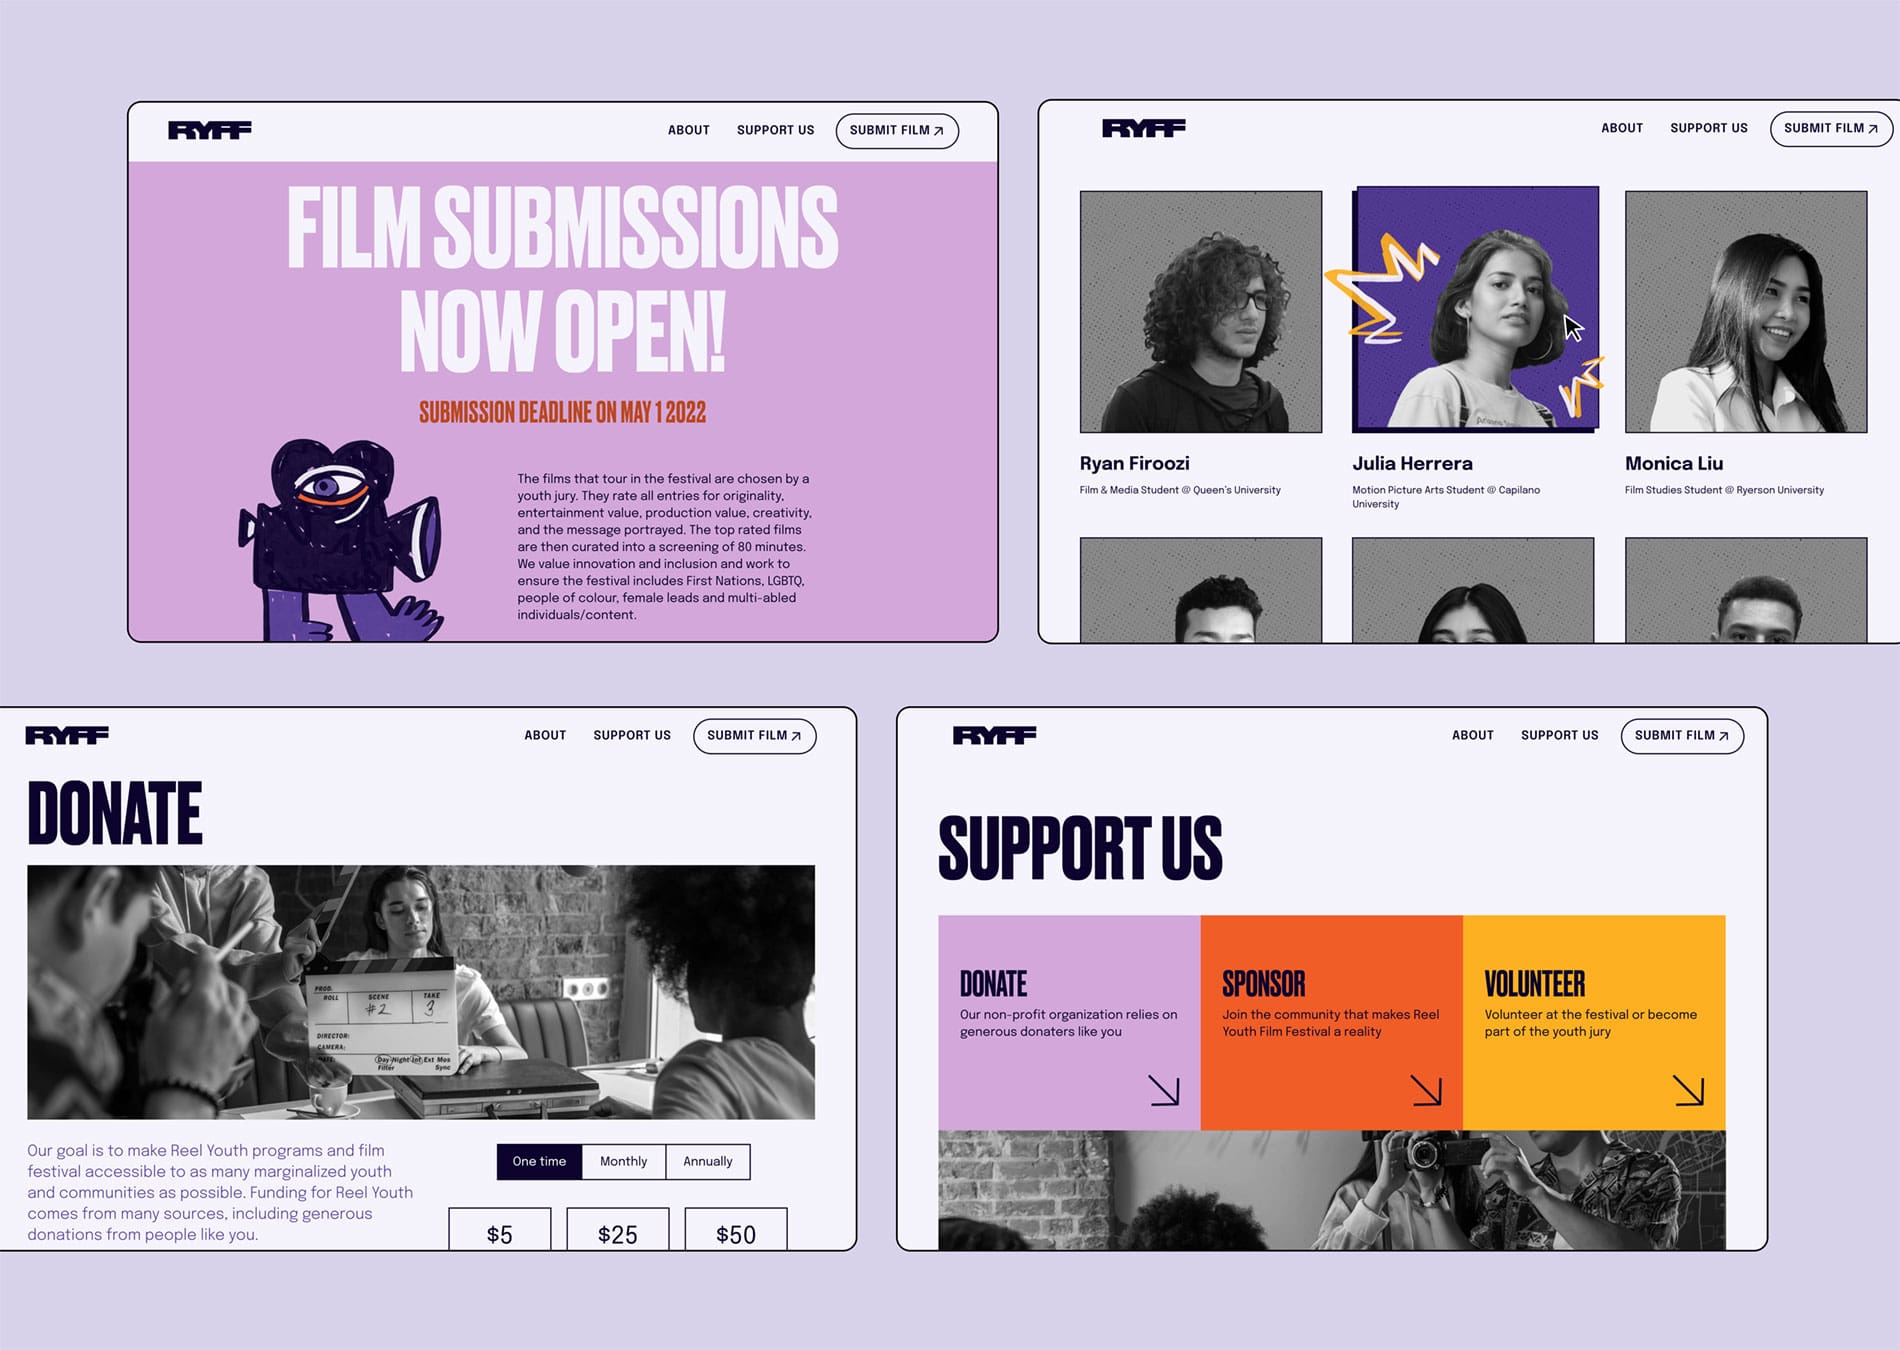 4 screens of the Reel Youth Film Festival website